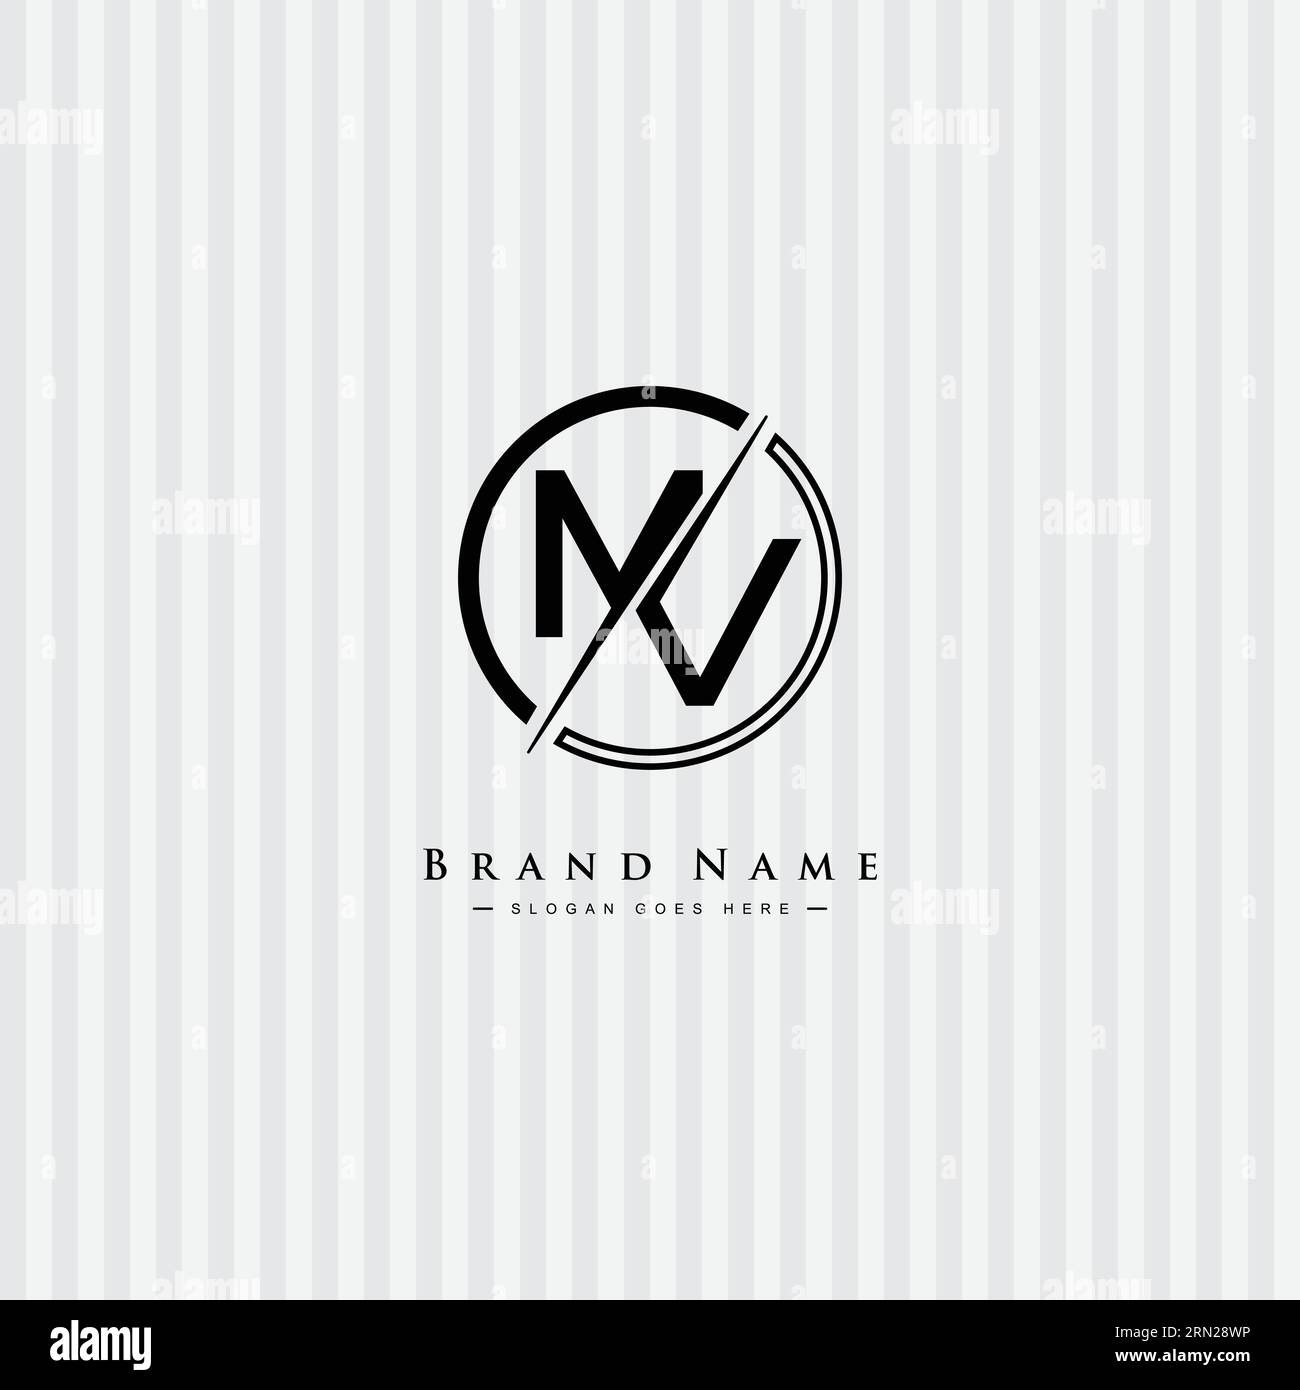 MV Vector Logo Template - Simple Icon for Initial Letter M and V Monogram Stock Vector